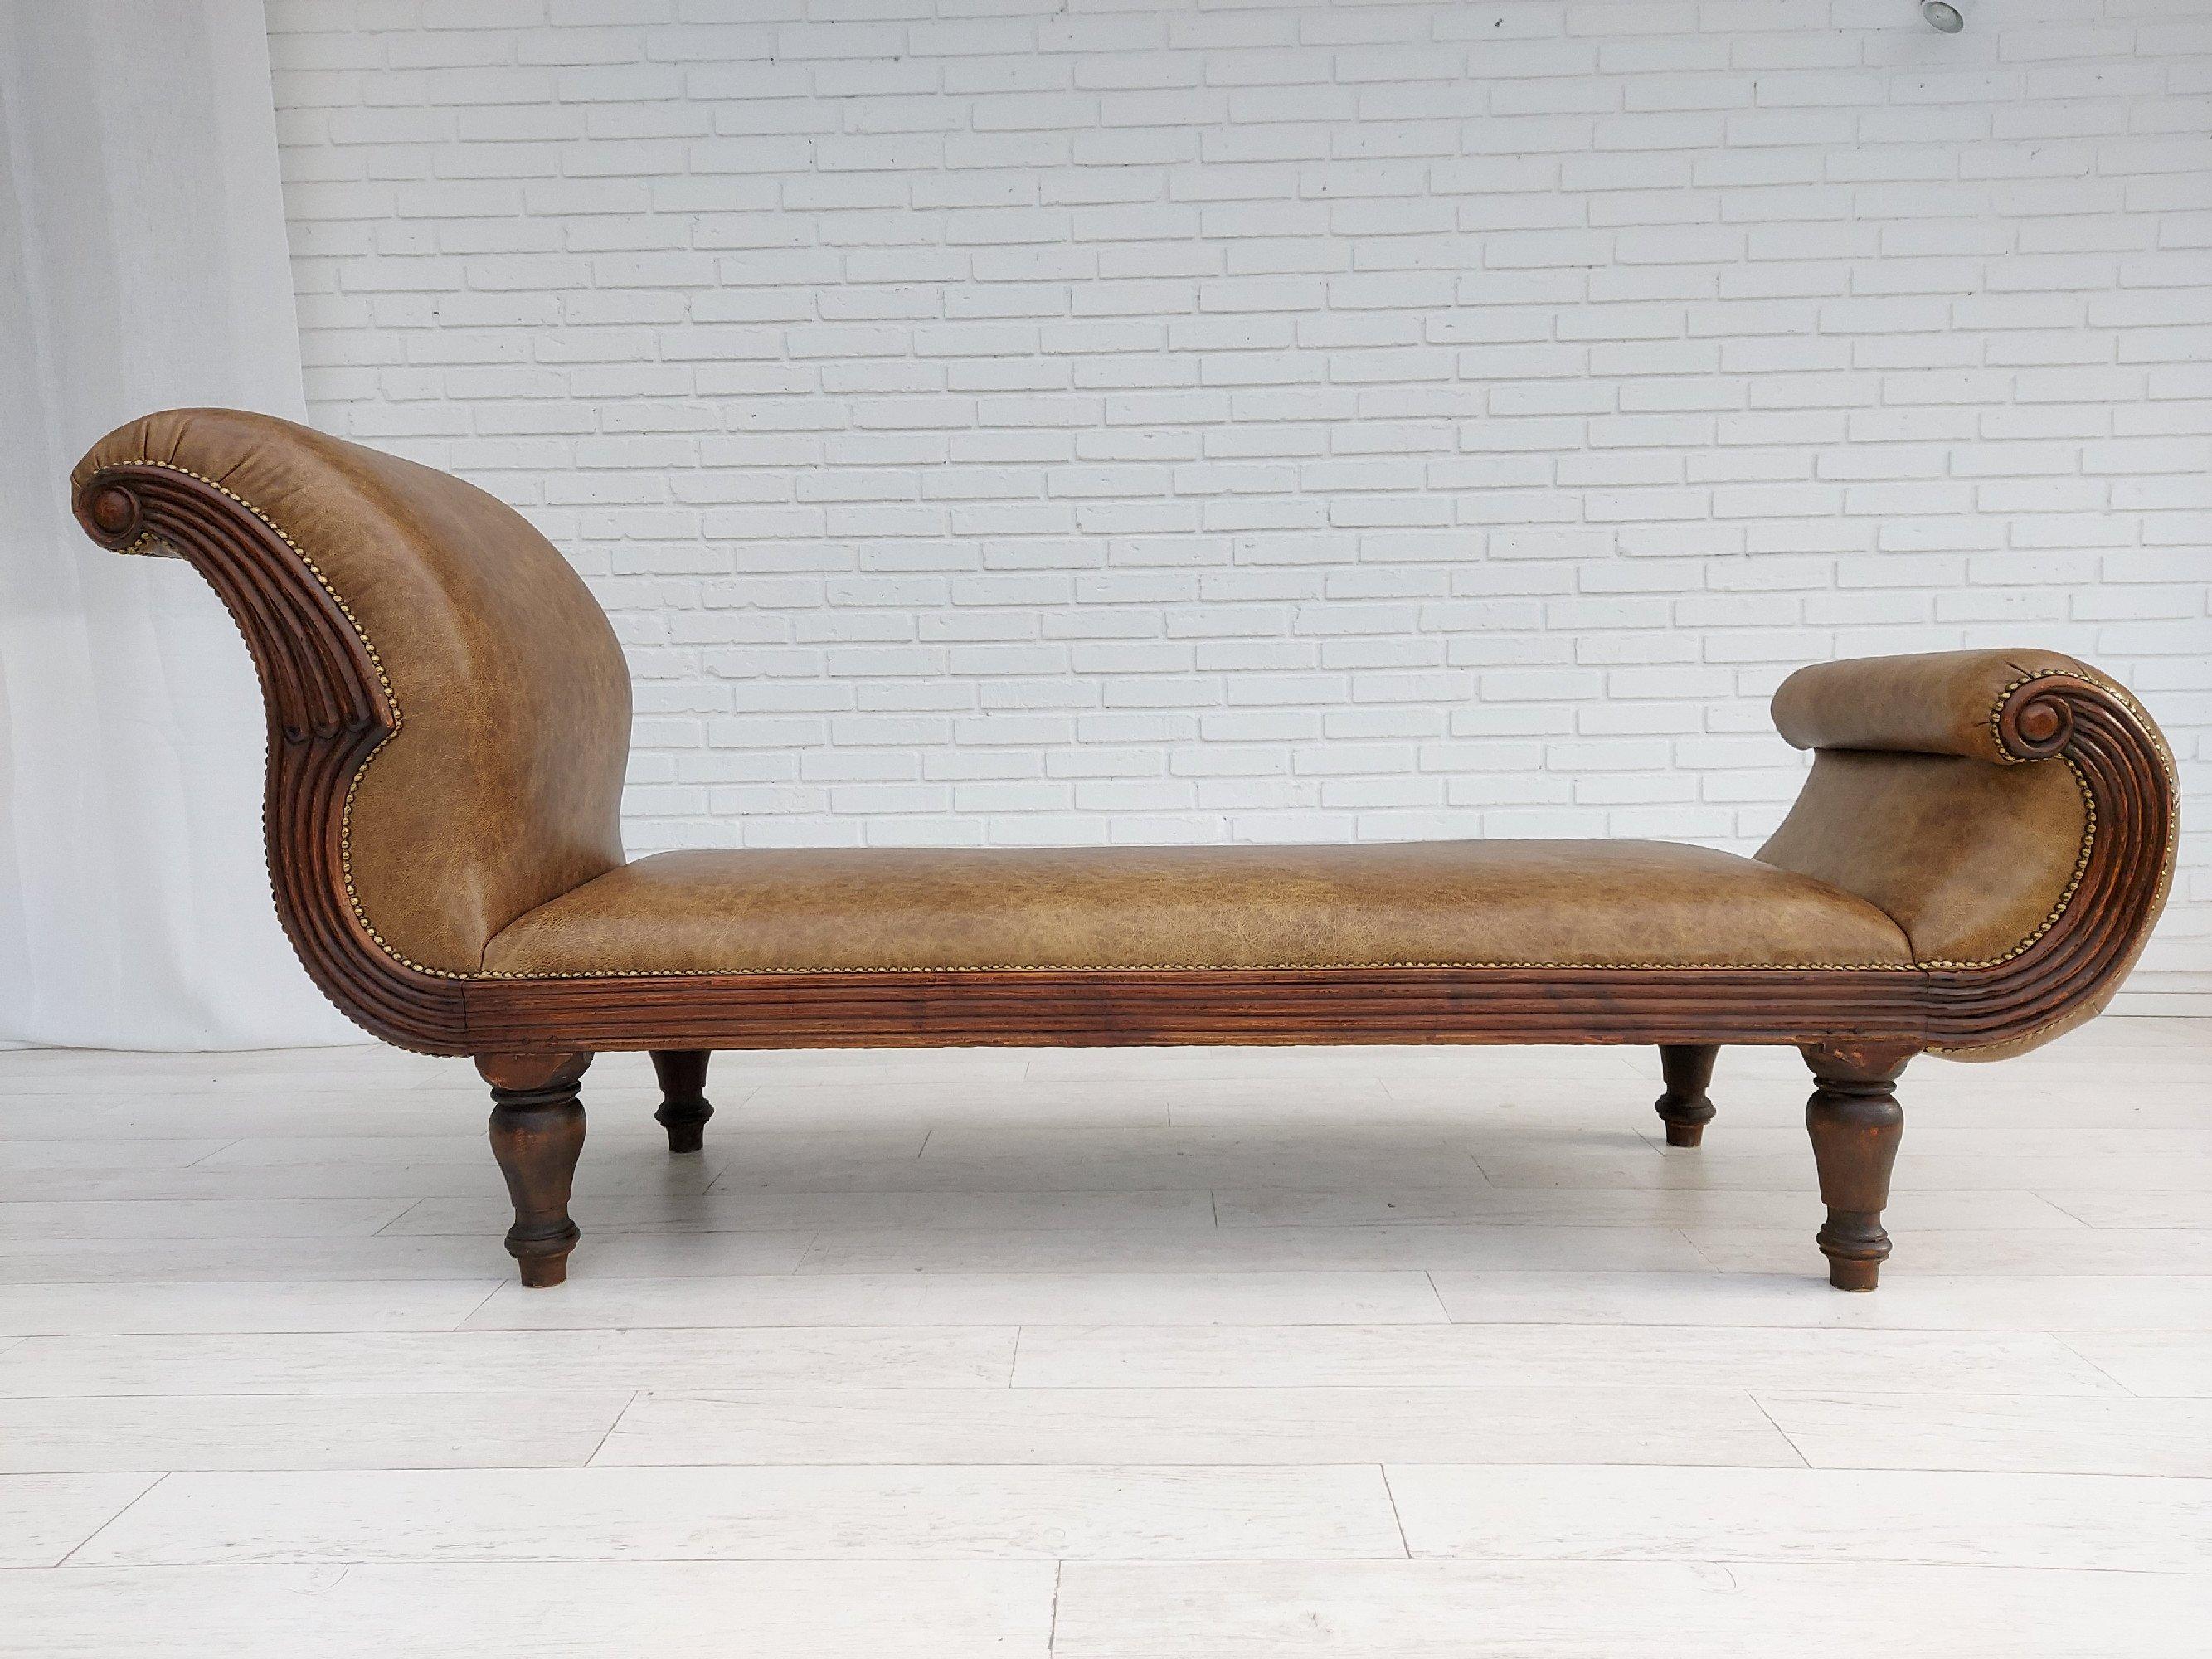 Mid-Century Modern Danish Antique Chaise Longue / Daybed, Early 20th Century, Renovated For Sale